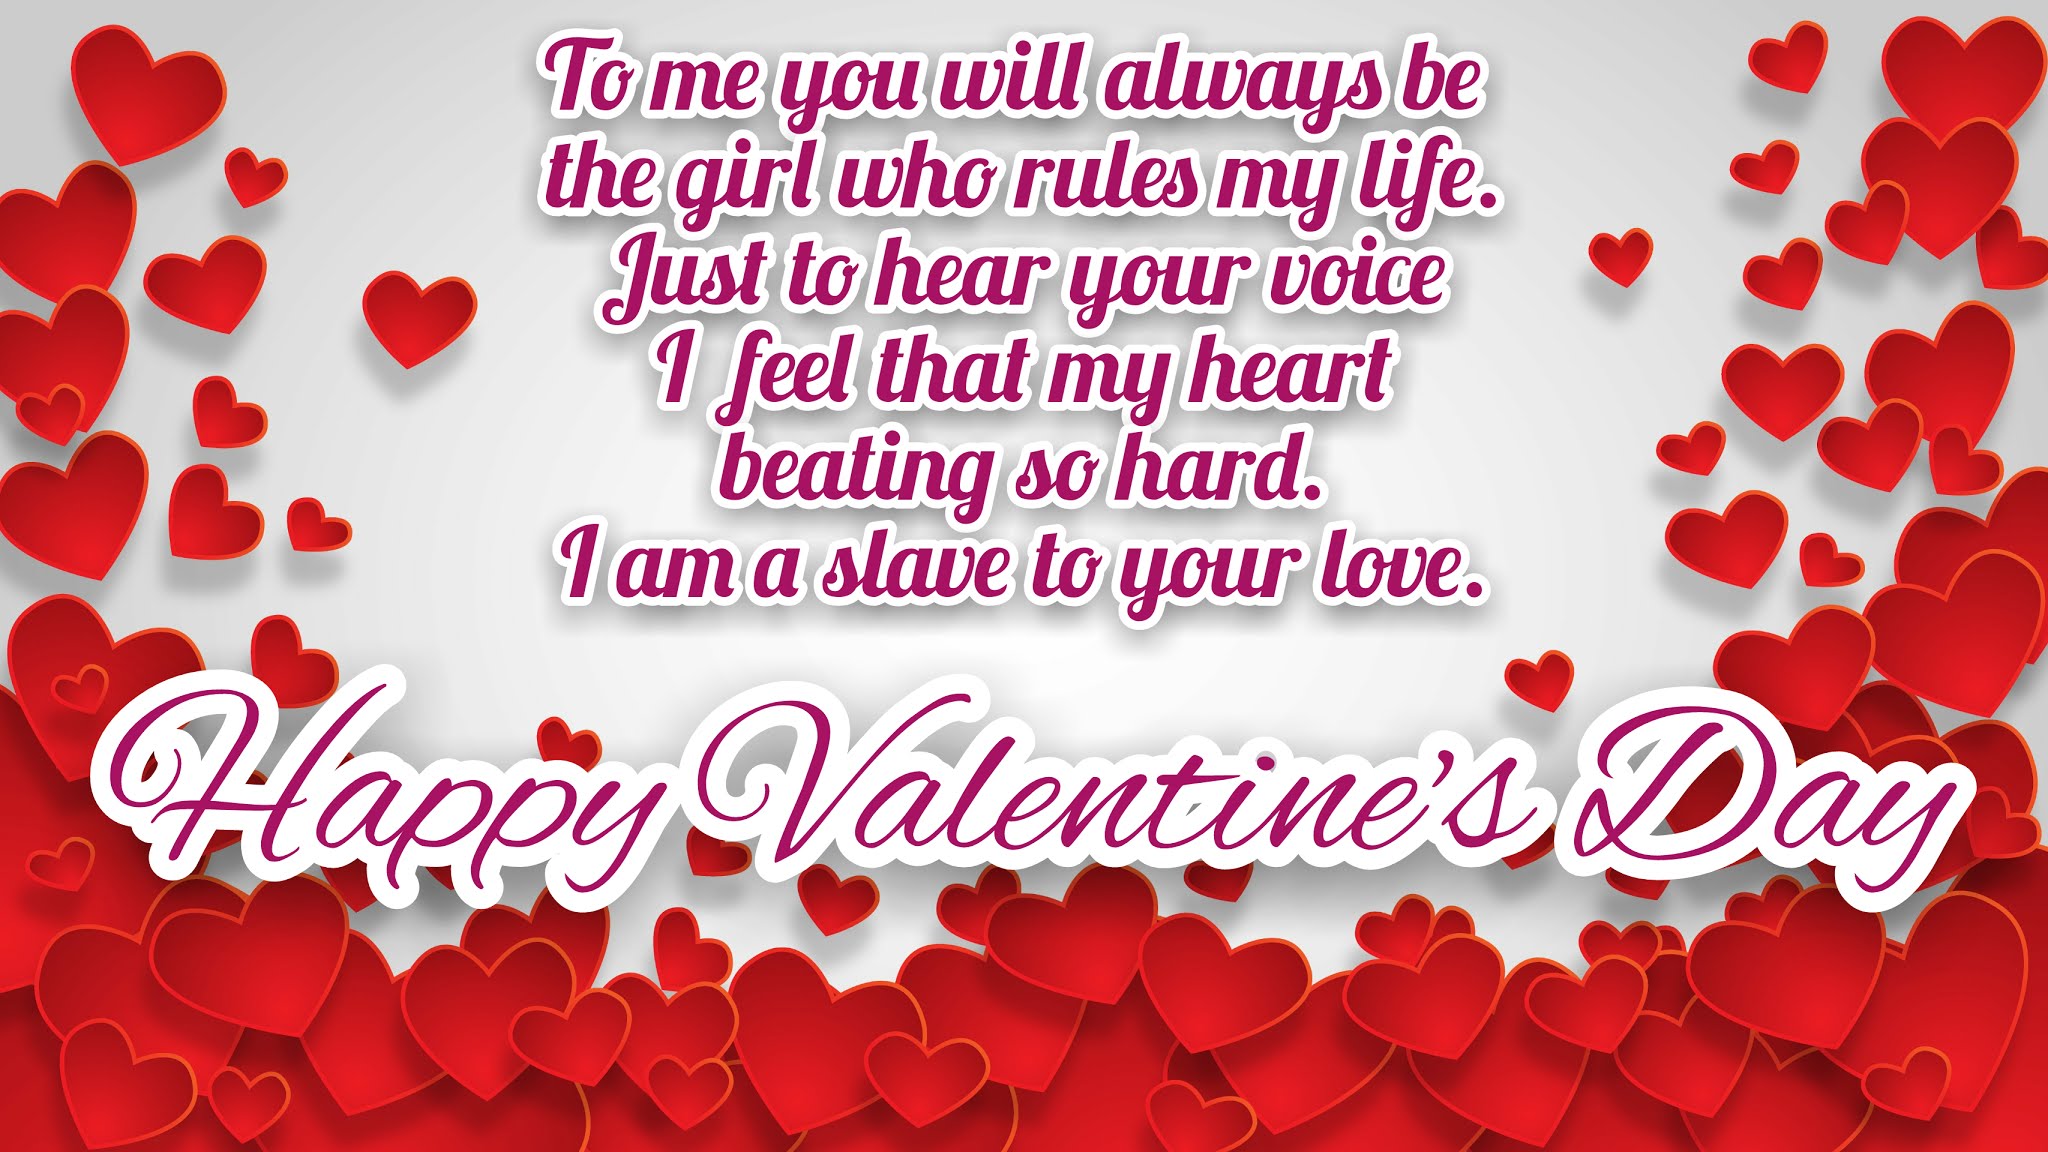 Happy Valentine's Day 2021 Greetings Images, Valentine's Day 2021 Quotes